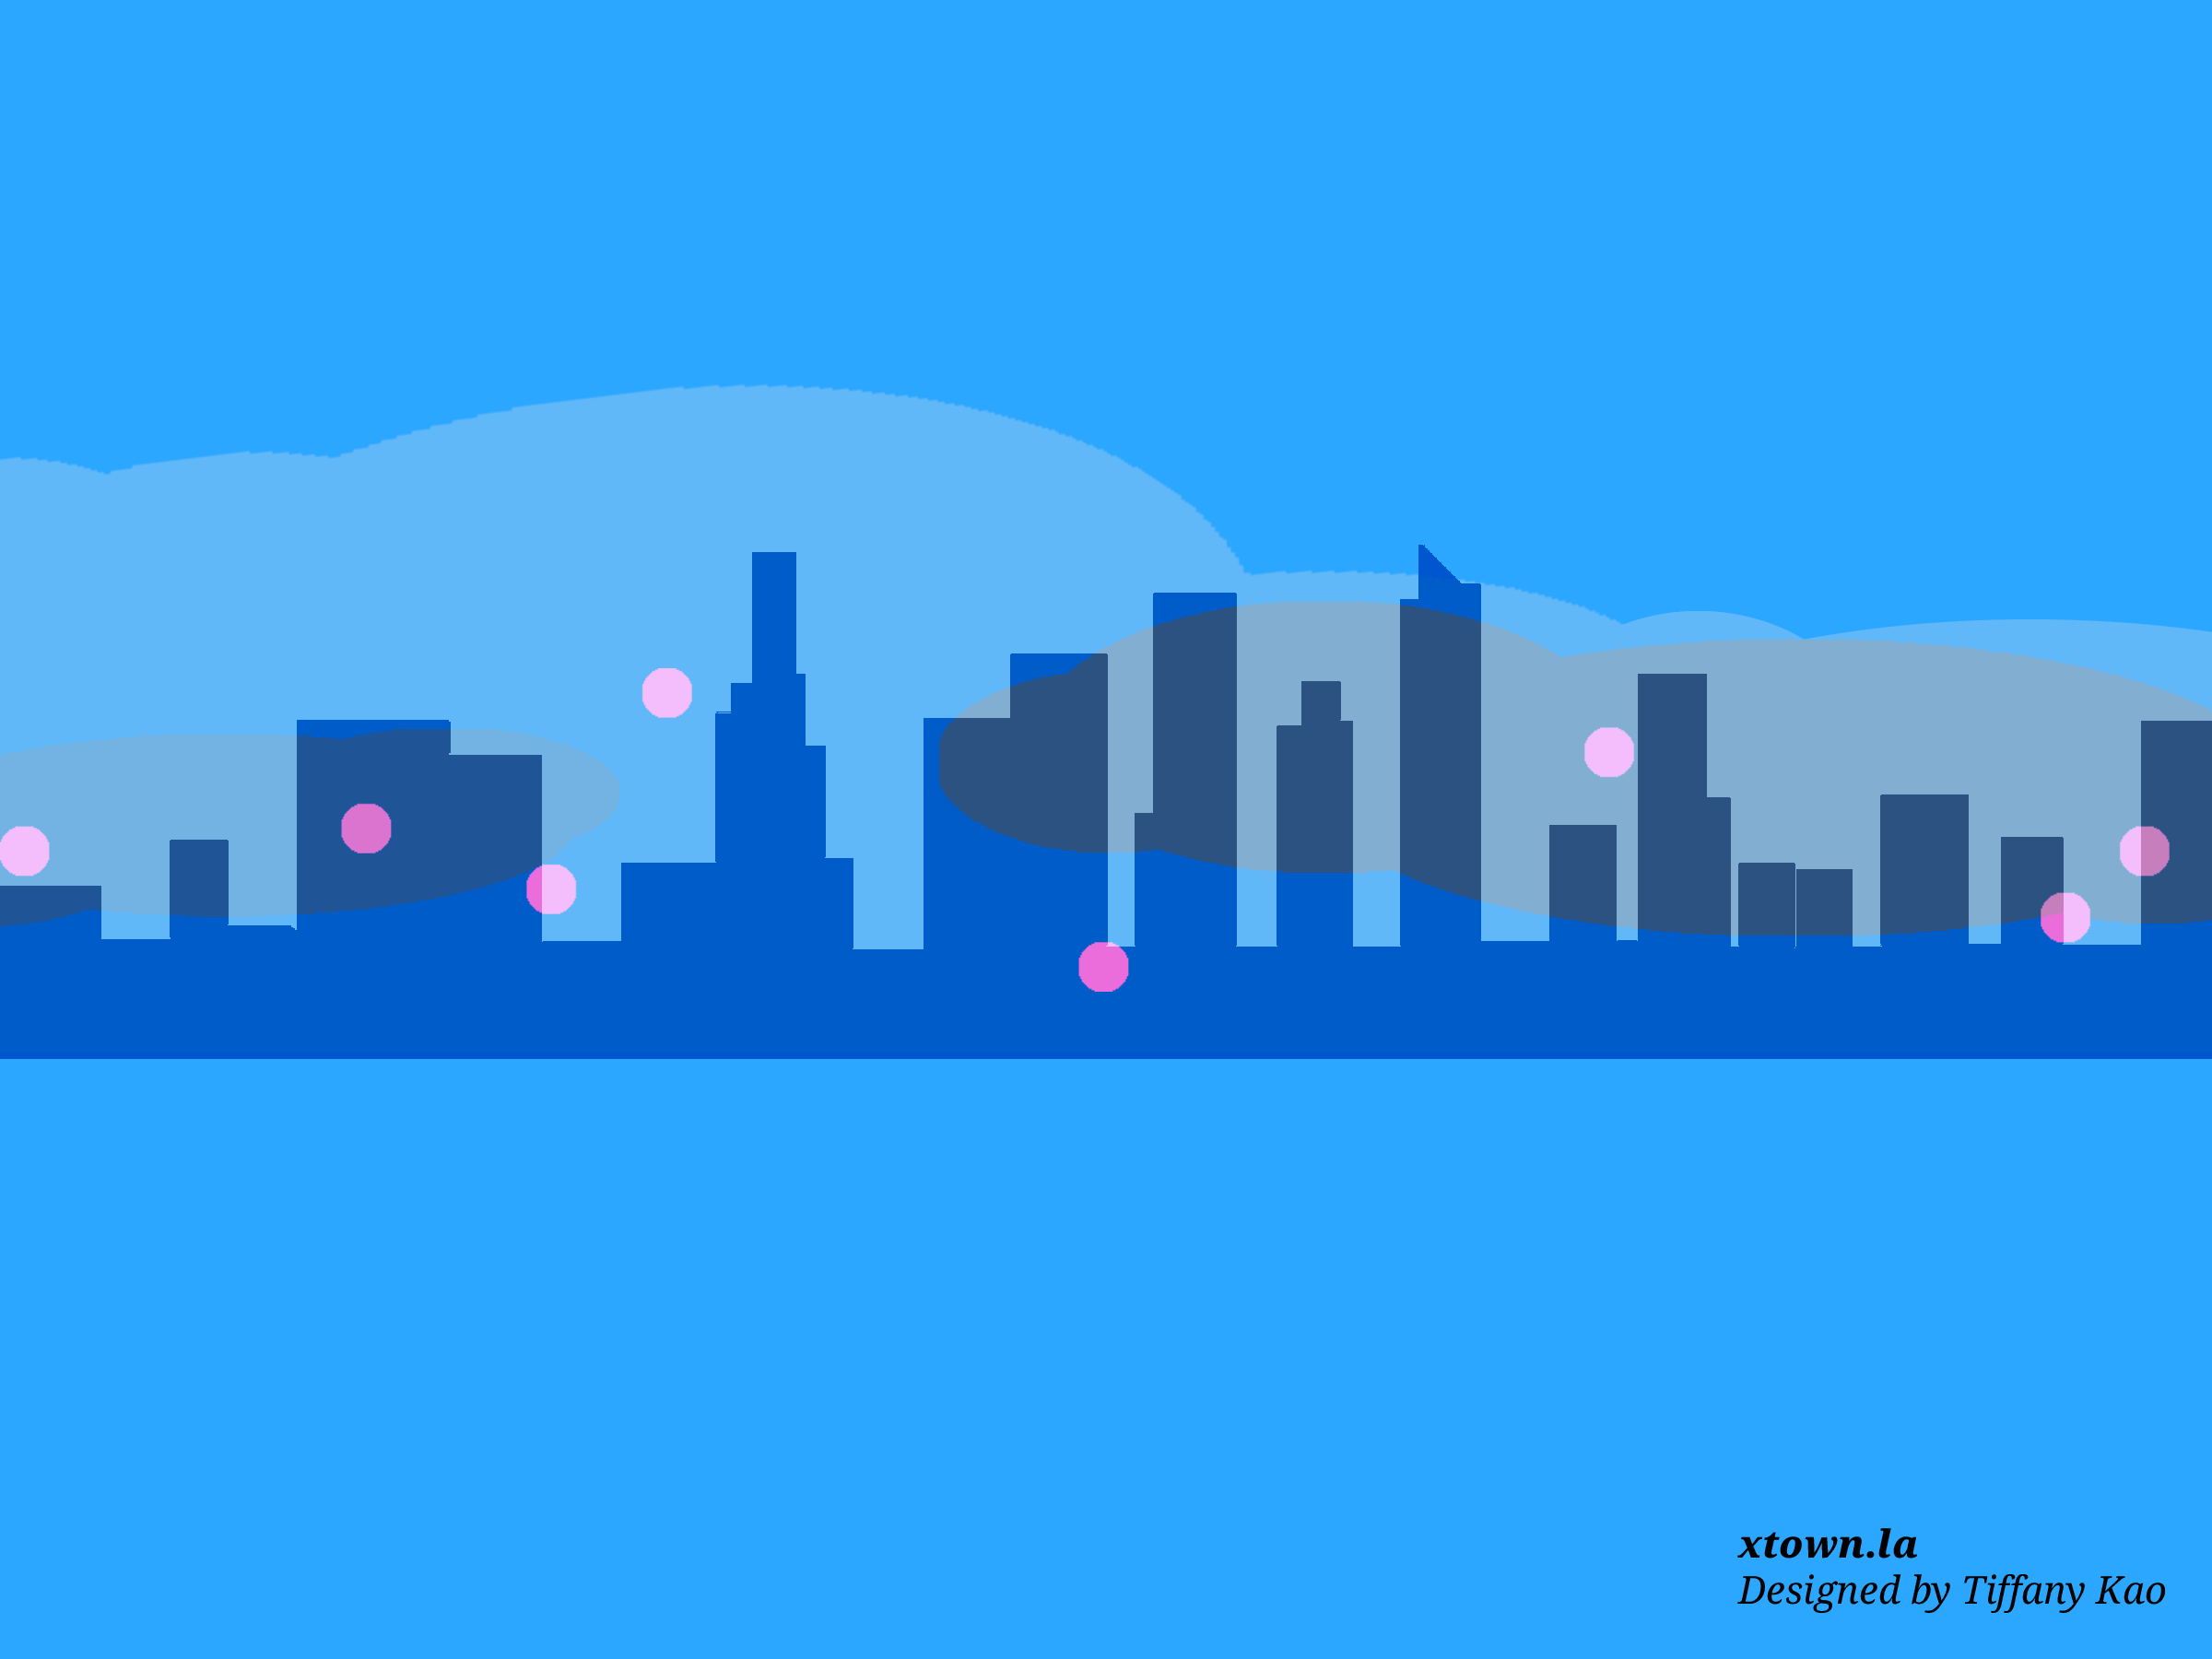 Gif of particulates in the air in the L.A. skyline